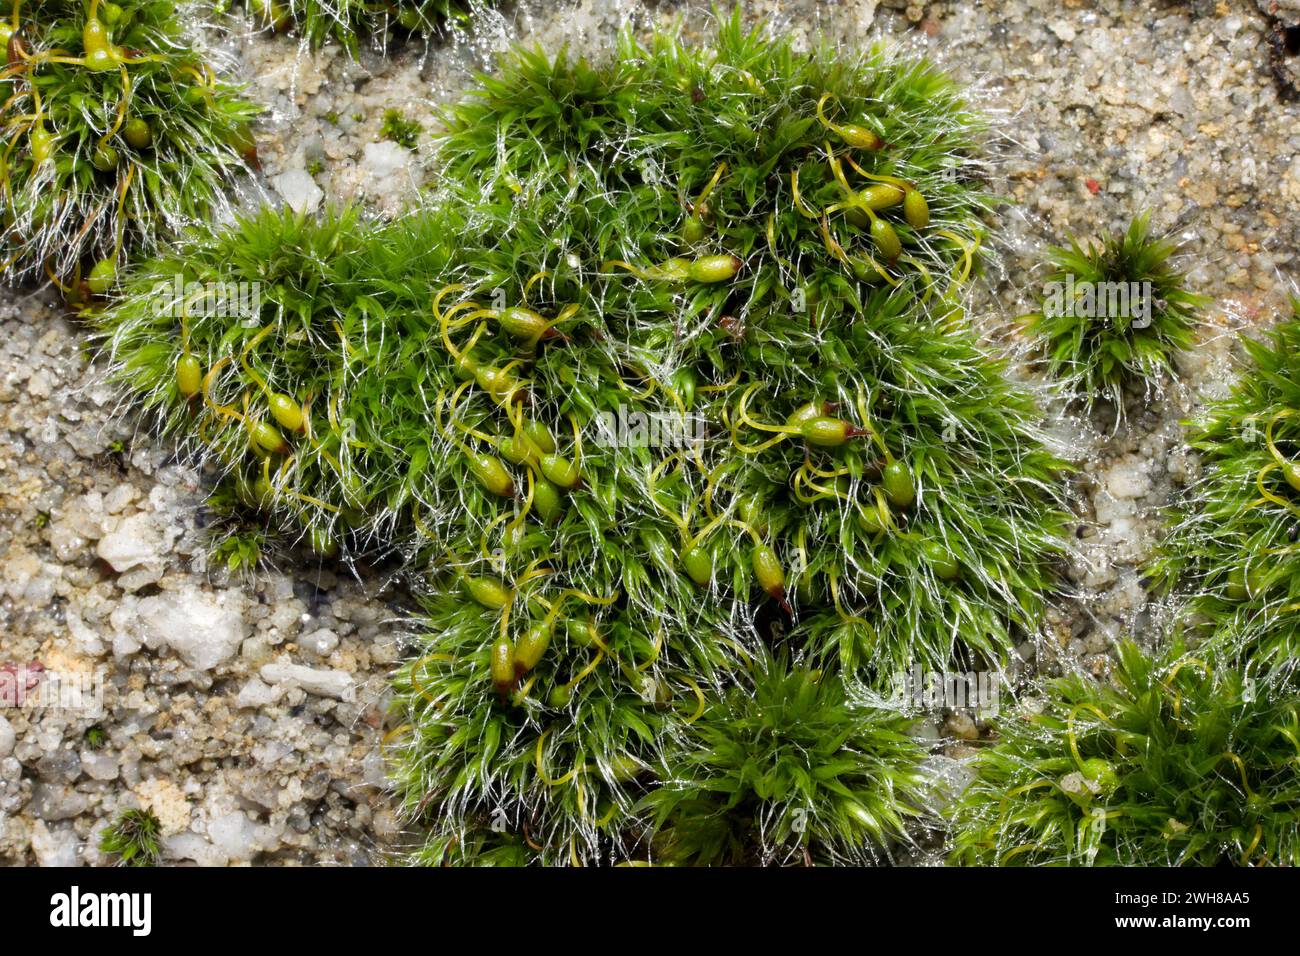 Grimmia trichophylla (Hair-pointed Grimmia) is predominantly an upland moss found exclusively on siliceous rock. It has a worldwide distribution. Stock Photo